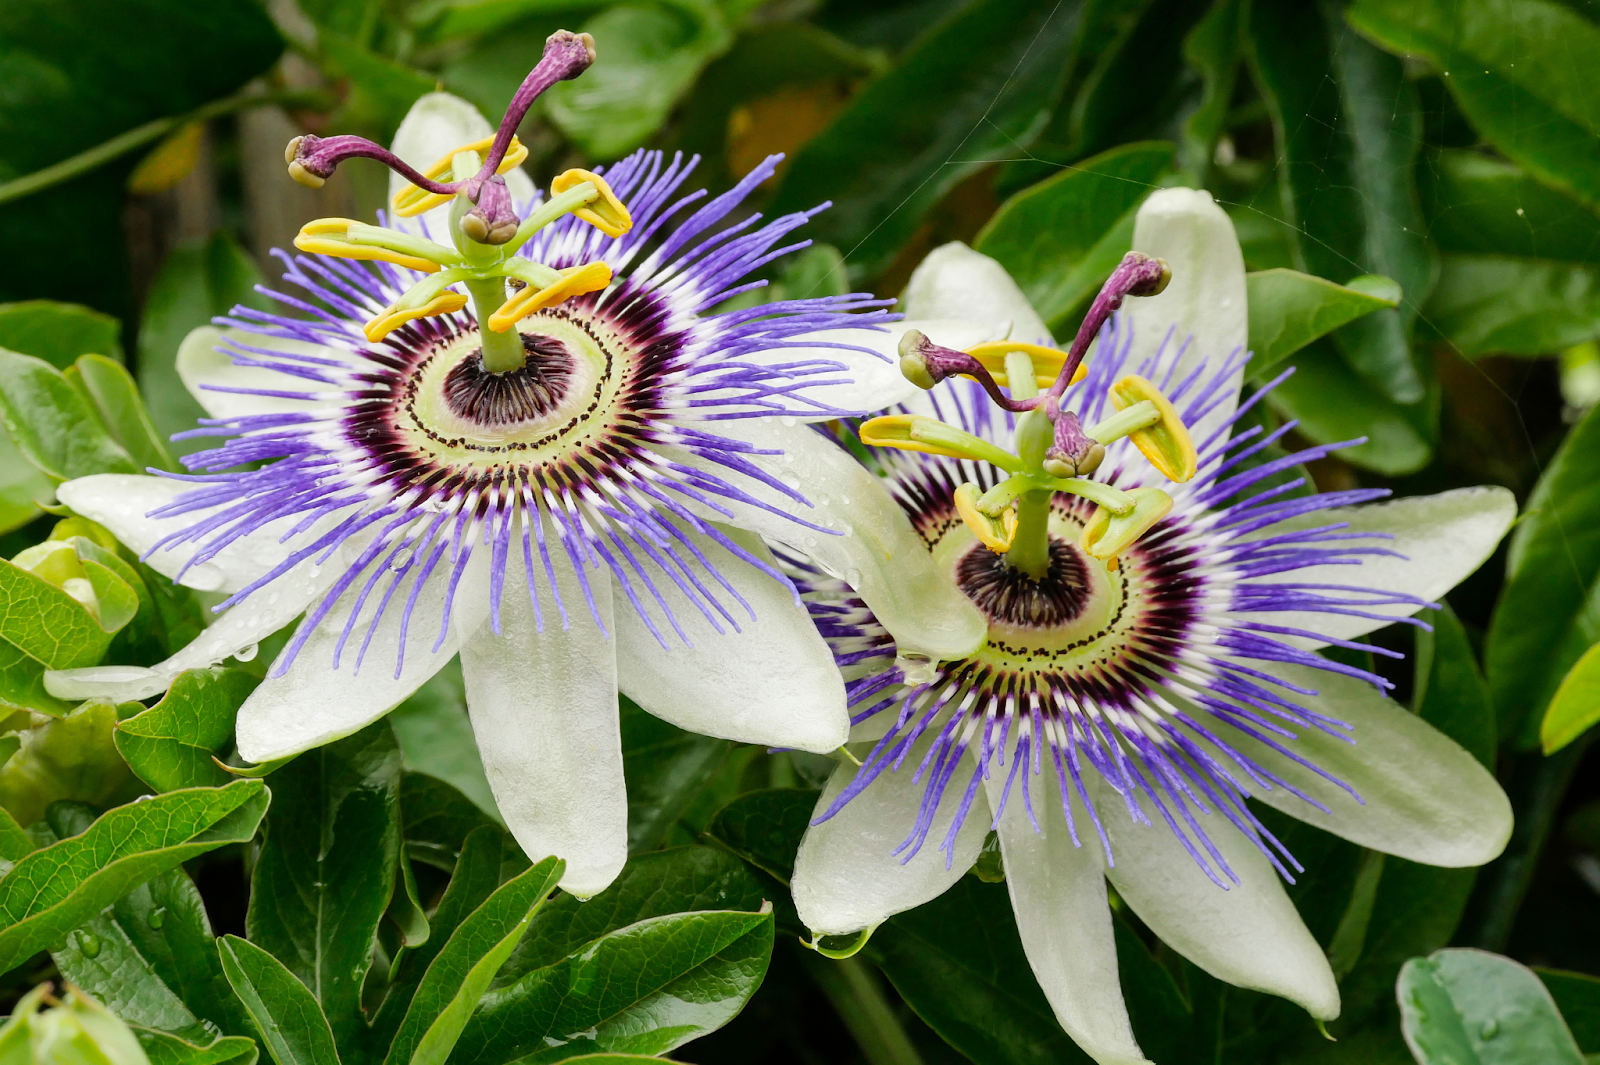 What is a Passion Flower?